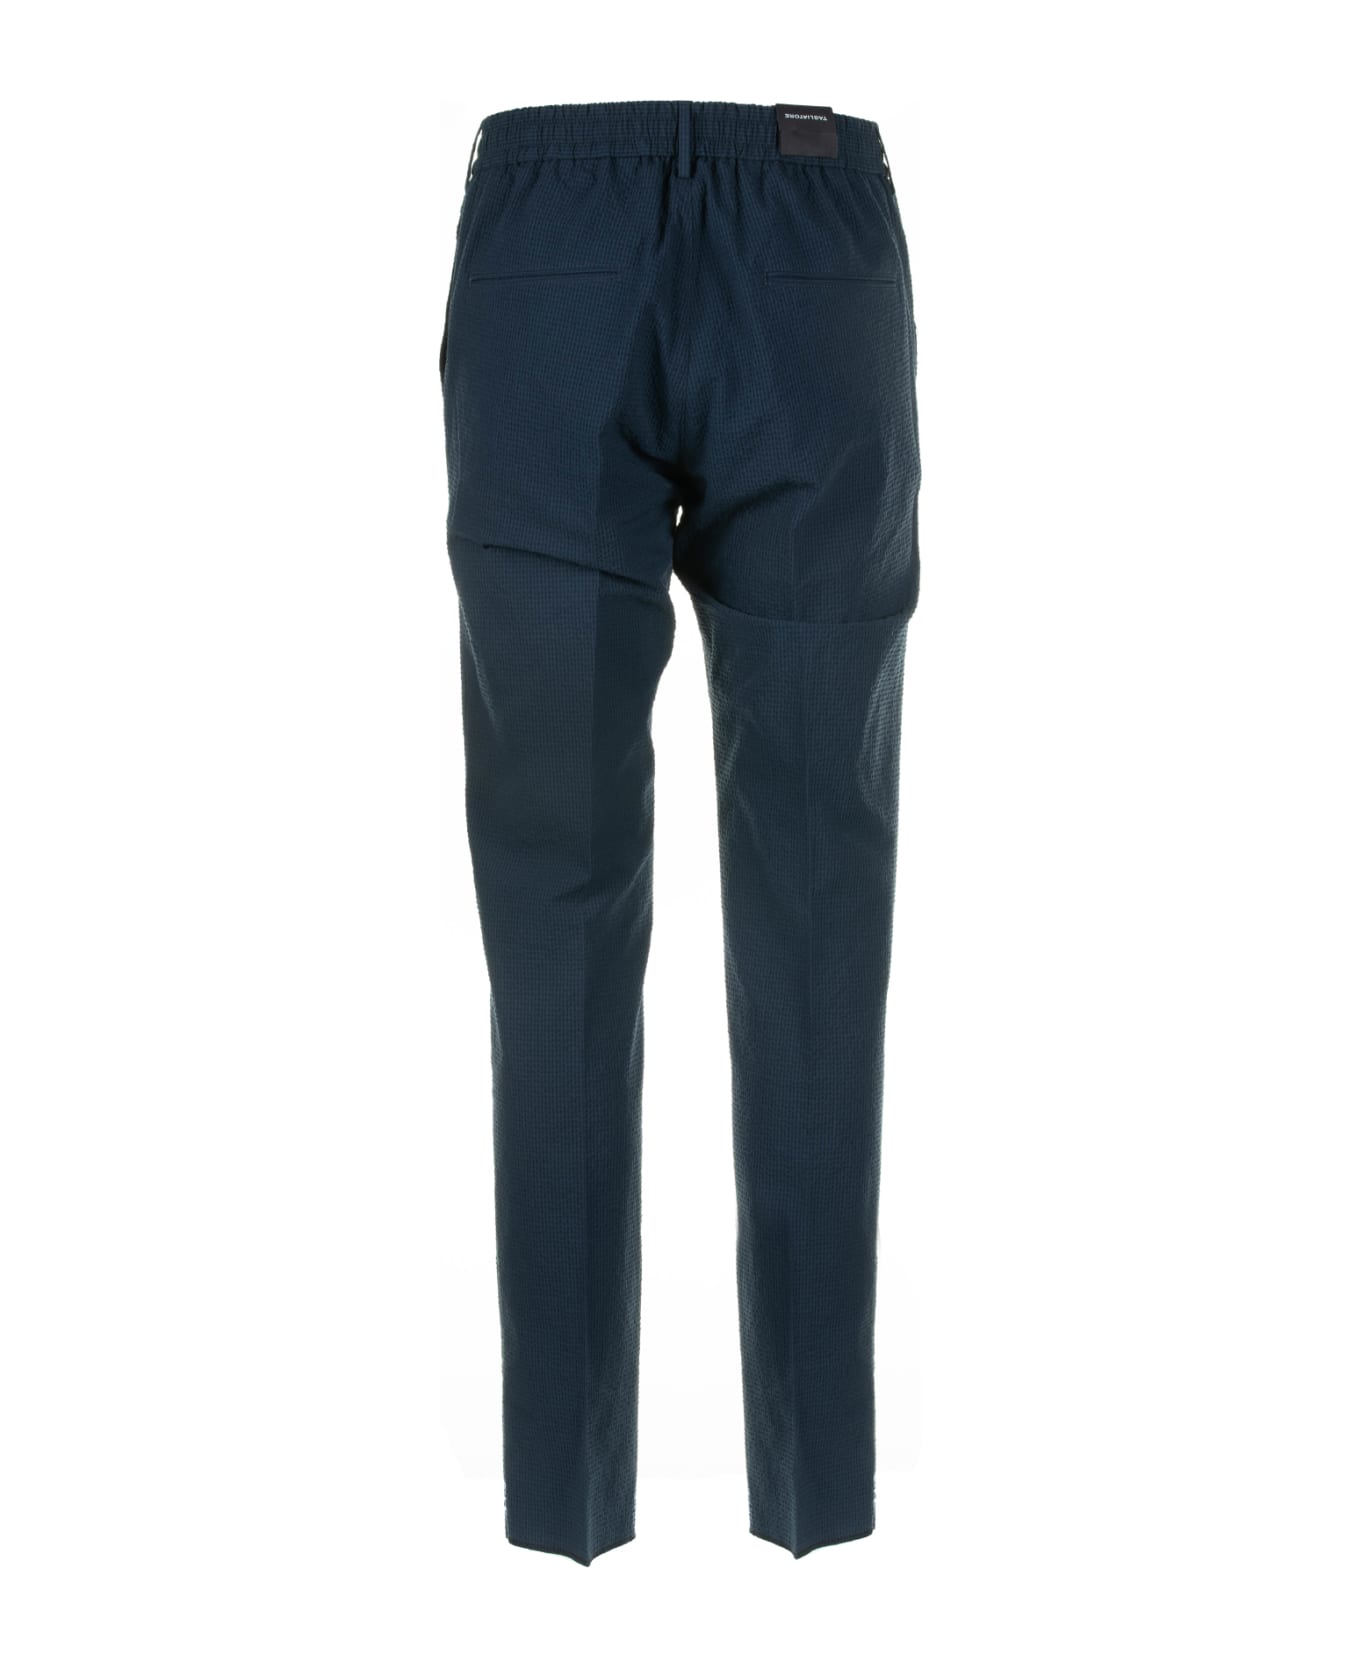 Tagliatore Navy Blue Trousers With Drawstring - AVION